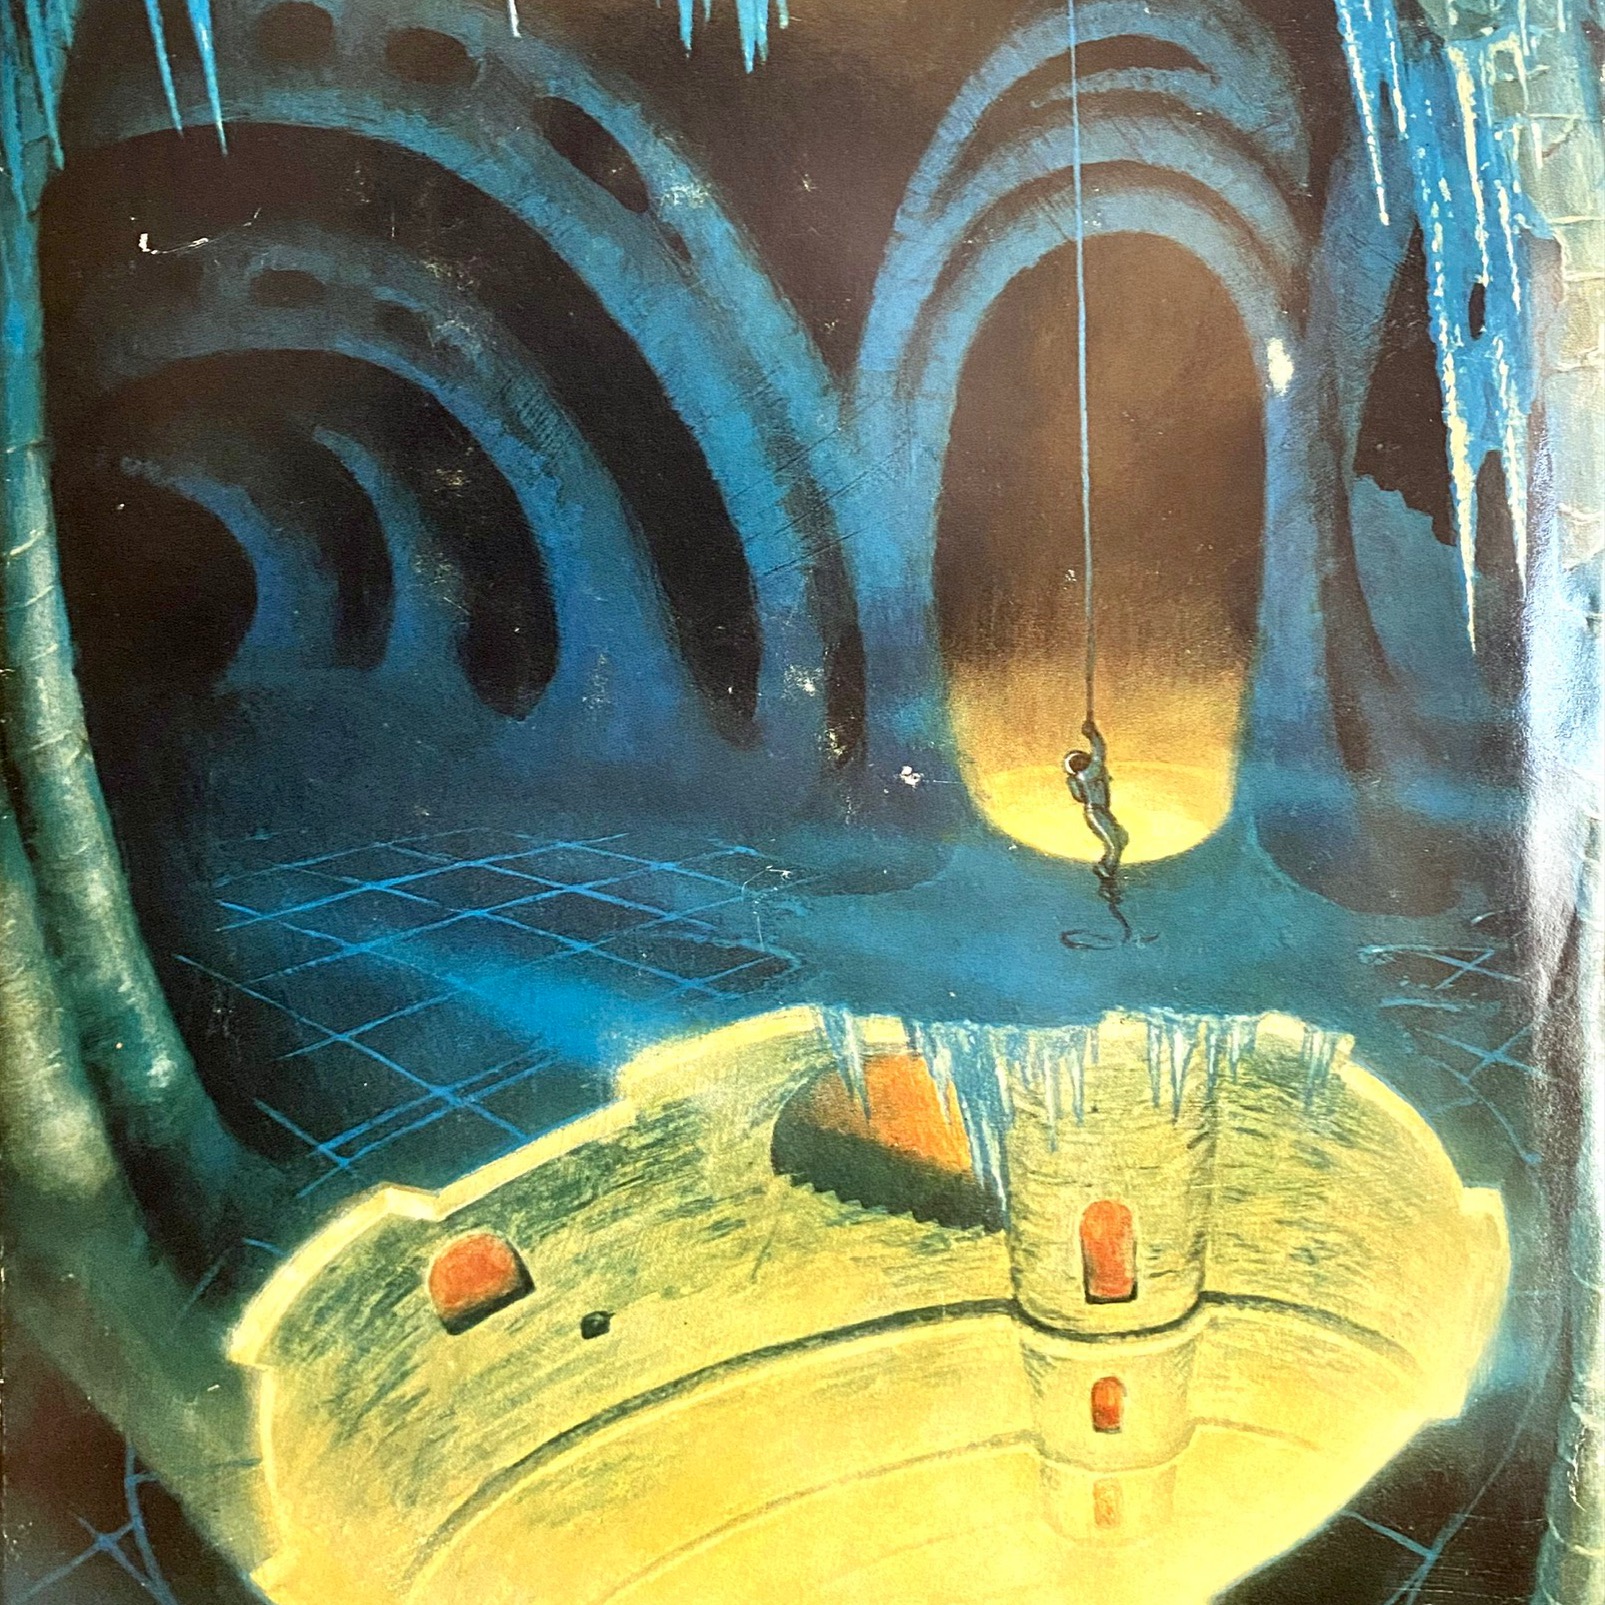 Journey to the Center by Brian Stableford (back cover)